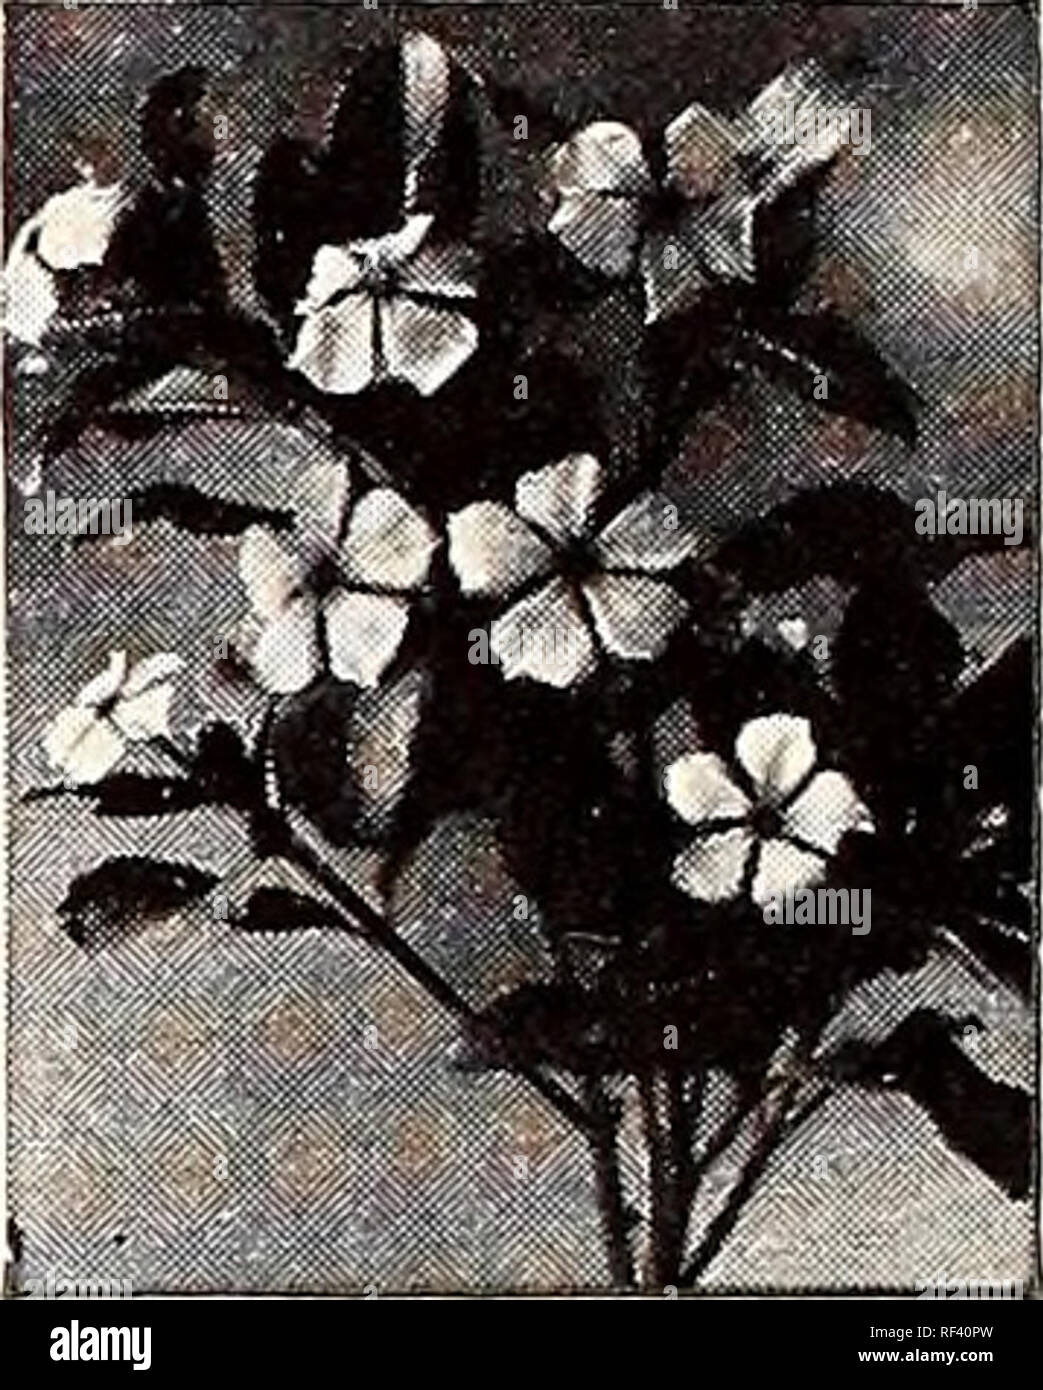 . Catalog 1946 : magnolia seeds are good seeds.. Seeds Catalogs; Vegetables Catalogs; Plants Catalogs; Flowers Catalogs; Gardening Equipment and supplies Catalogs. ZINNIA— DAHLIA FLOWERED (2y2 ft.) —Flowers are 2% to 4 inches across and are par- ticularly liked for their slightly hol- lowed petals which are loosely placed.. Vinca Rosea rLw Tithonia Speciosa ZIN NI A—LILLIPUT (12 in.) (See inside Back Cover Illustration.)— Produces an abundance of double flowers about 1 in. in diameter, very popular for bouquets. SALMON GEM GOLDEM GEM ROSEBUD WHITE GEM CANARY GEM SCARLET GEM PURPLE GEM Pkt. 10c Stock Photo